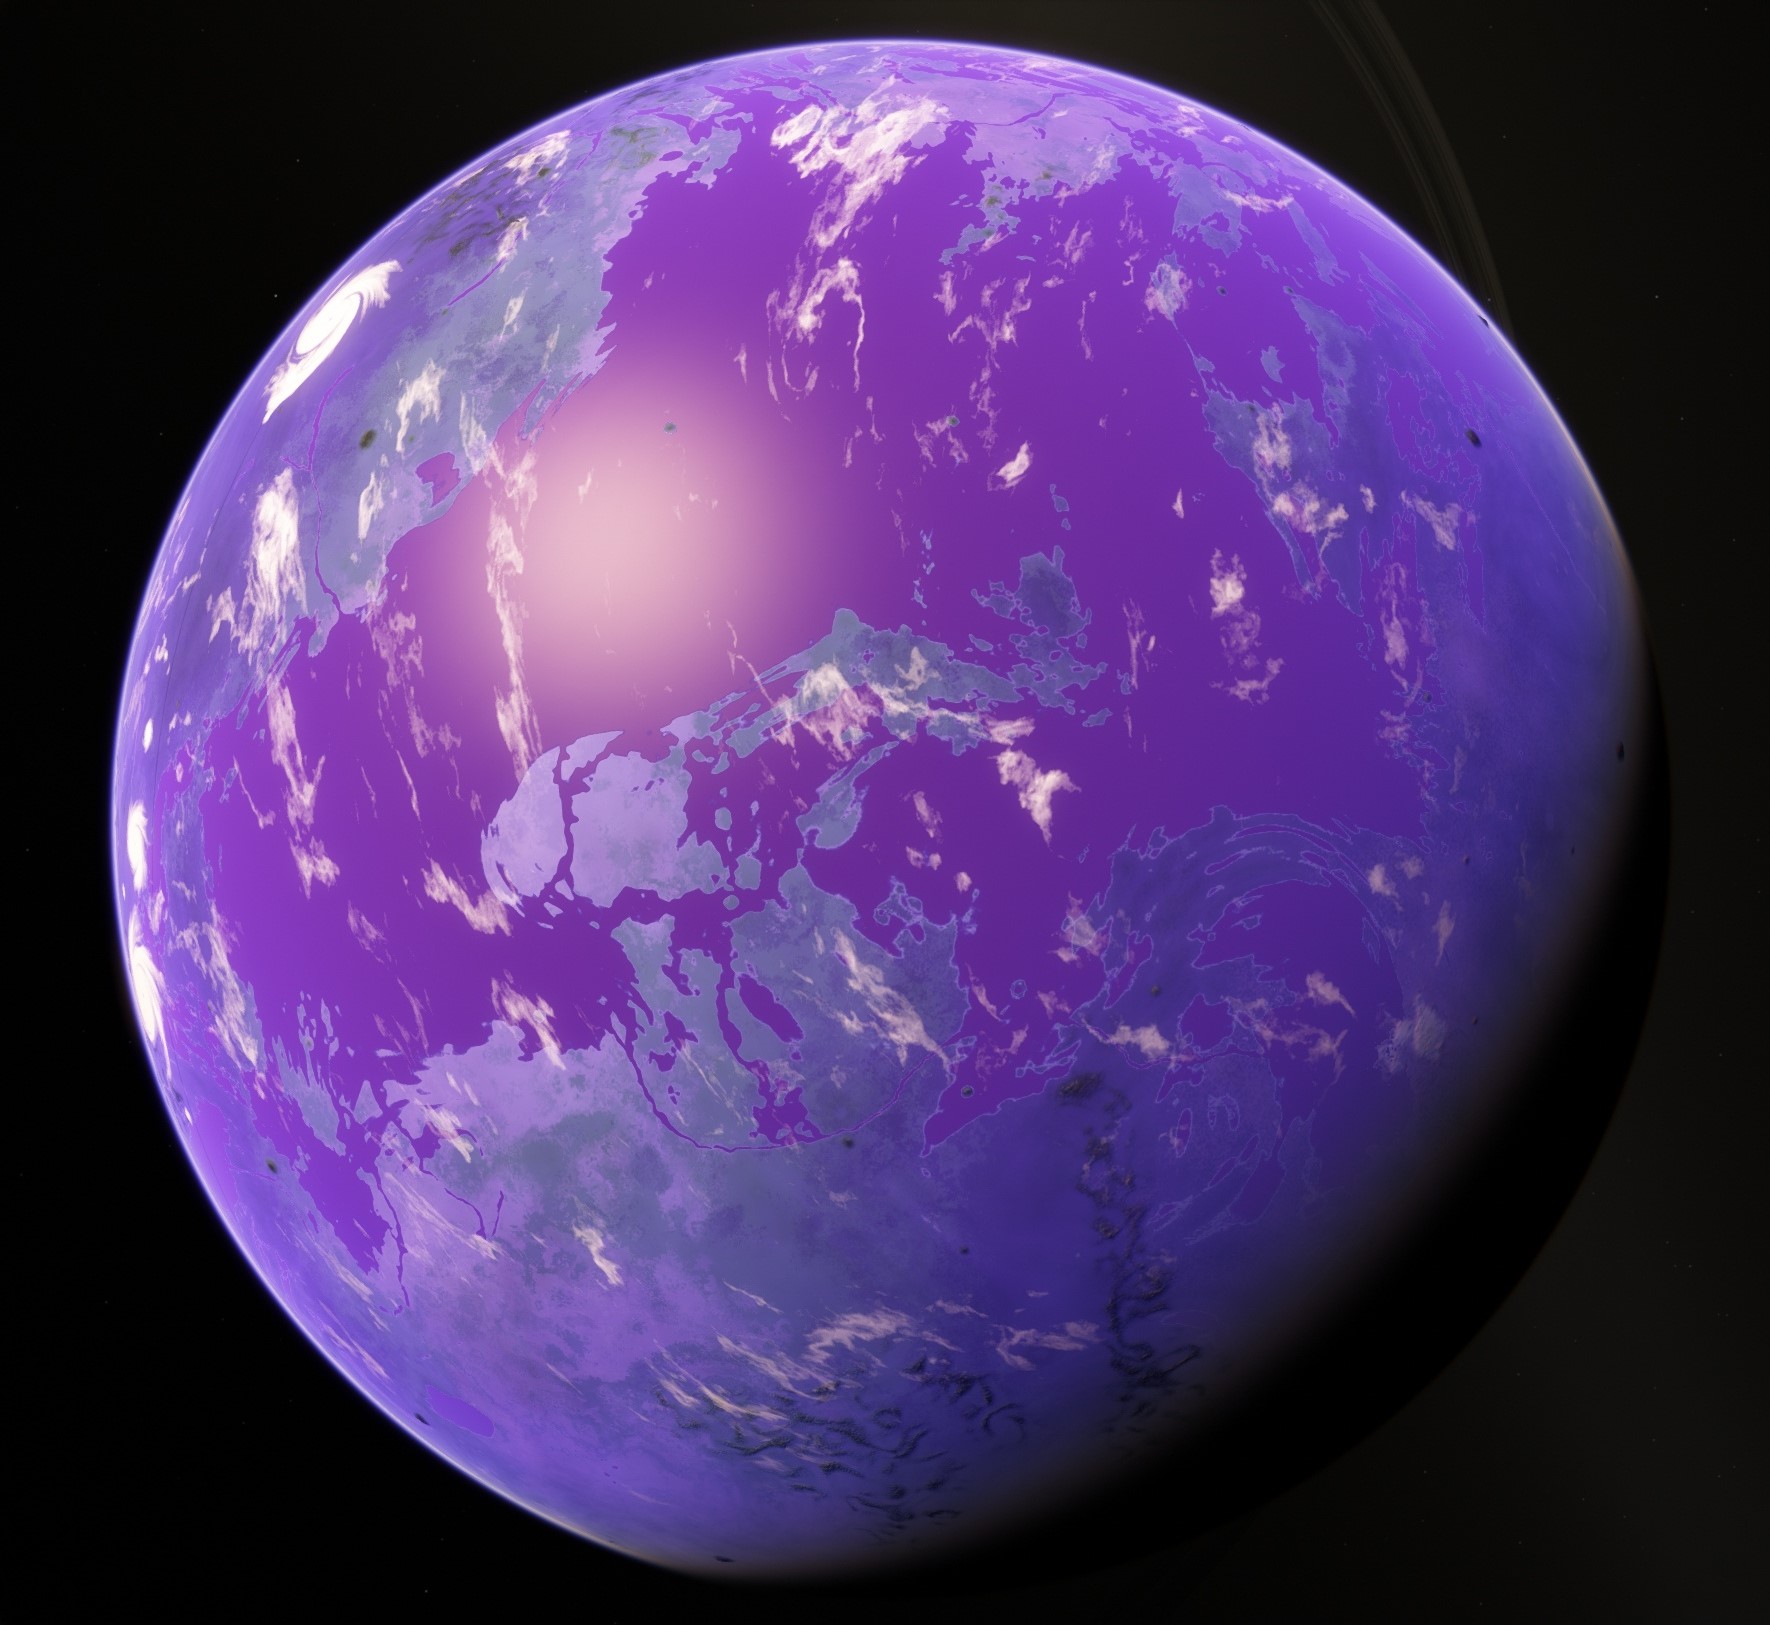 purple planets in space